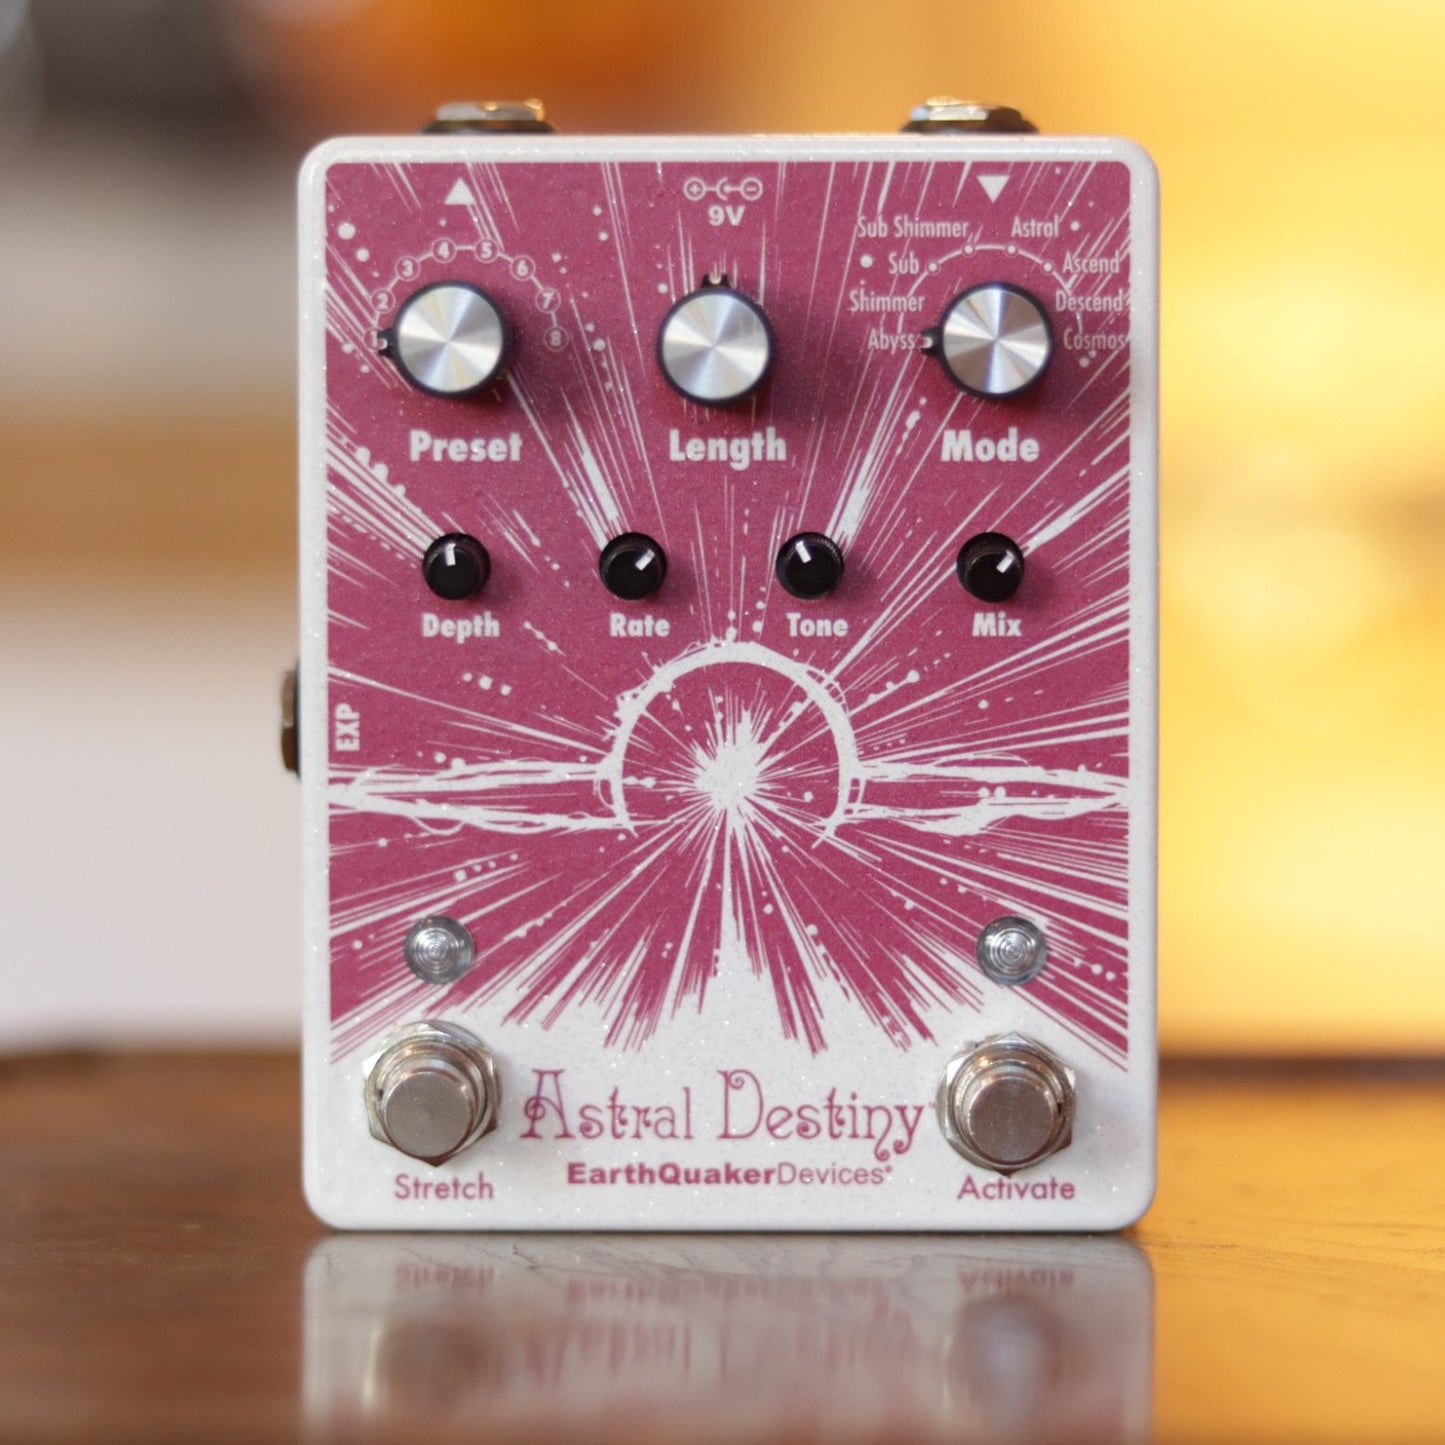 Astral Destiny EarthQuaker Devices Pedal